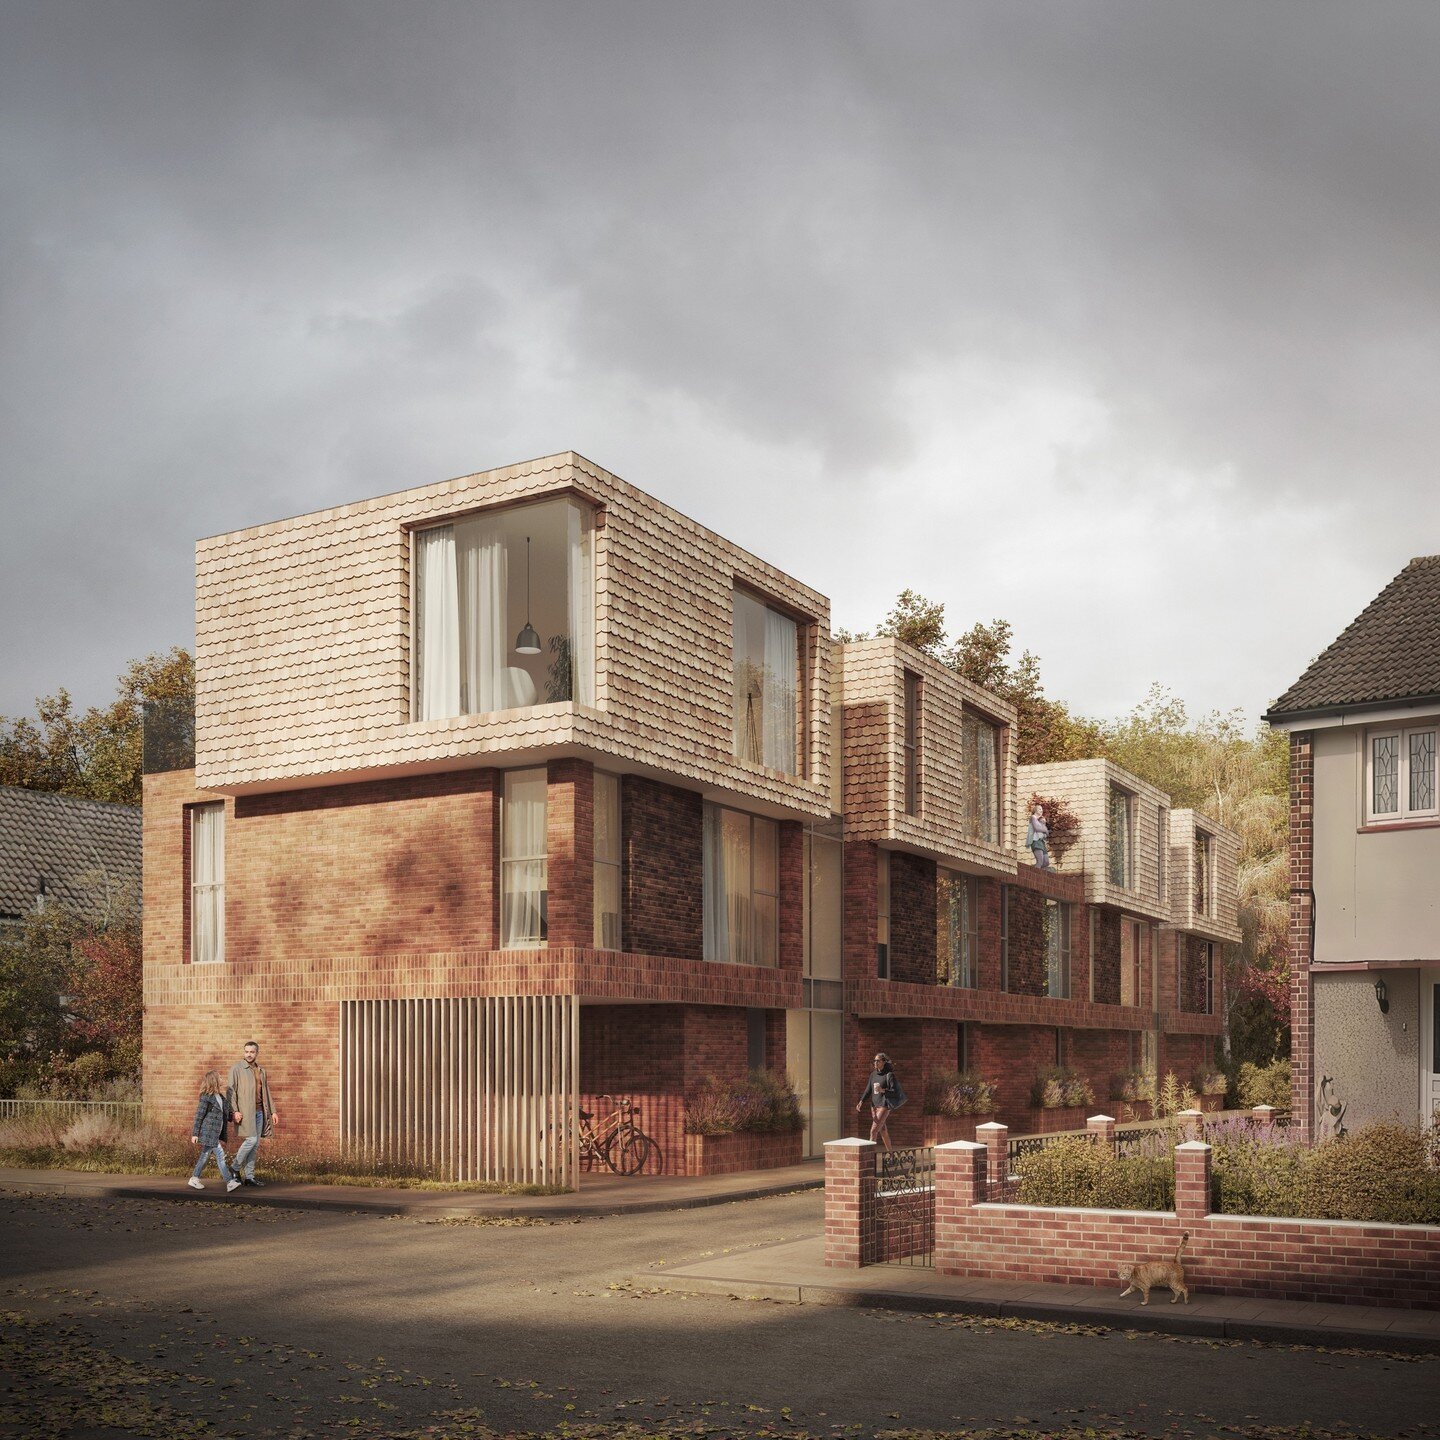 As part of Croydon Council's regeneration programme they had identified a series of infill sites across the borough for new housing. ⁠
⁠
In collaboration with developer Lightbox London, we undertook a series of feasibility studies for 3 sites to prov